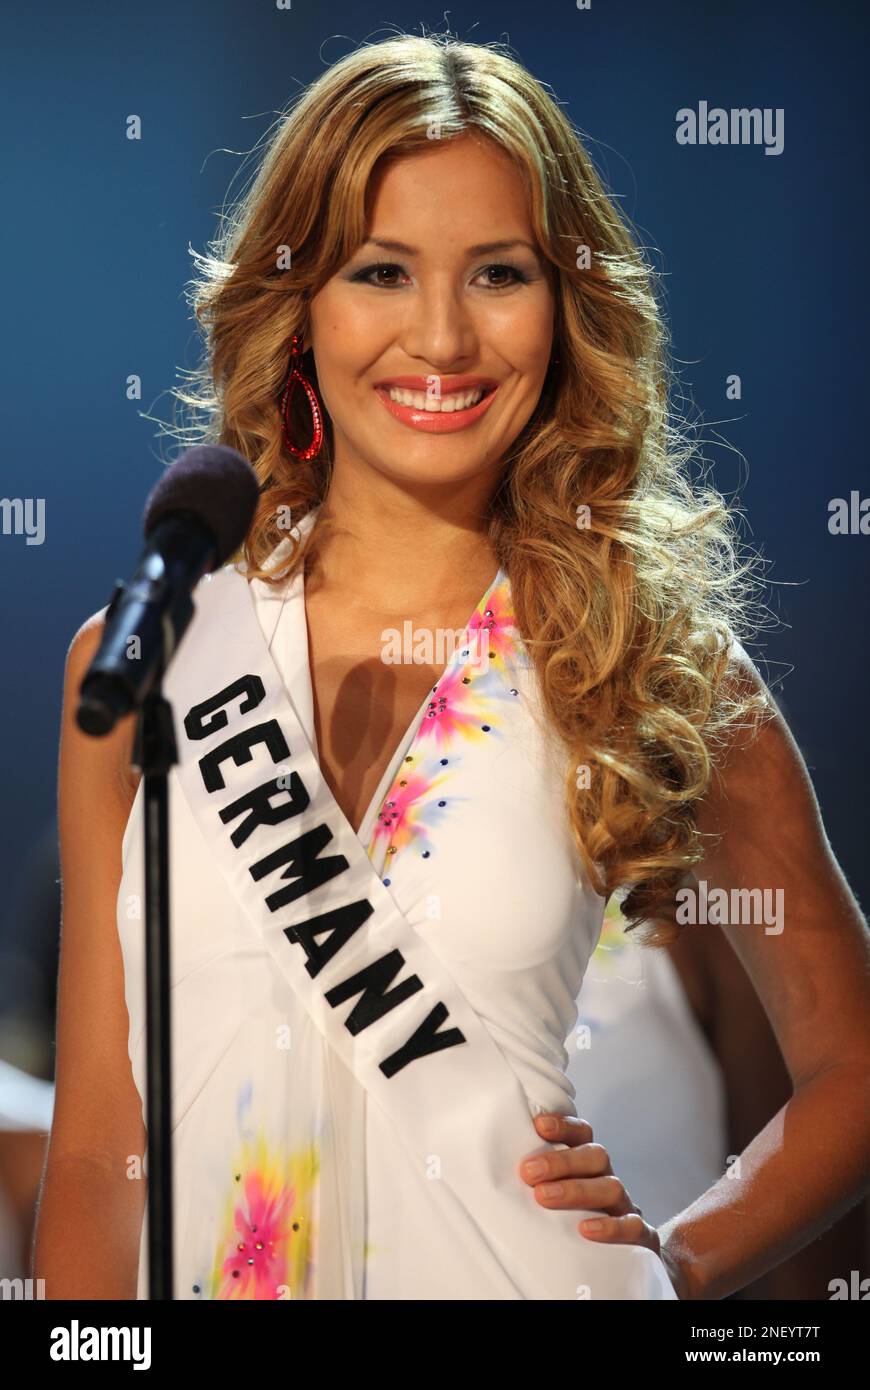 Miss Germany Martina Lee introduces herself during the opening event of the 2009 Miss Universe Preliminary Competition, at Atlantis, Paradise Island, Bahamas, Sunday, Aug. 16, 2009. During the Aug. 23 final pageant, Miss Universe will be picked from among contestants from 84 countries. (AP Photo/Brennan Linsley) Stock Photo